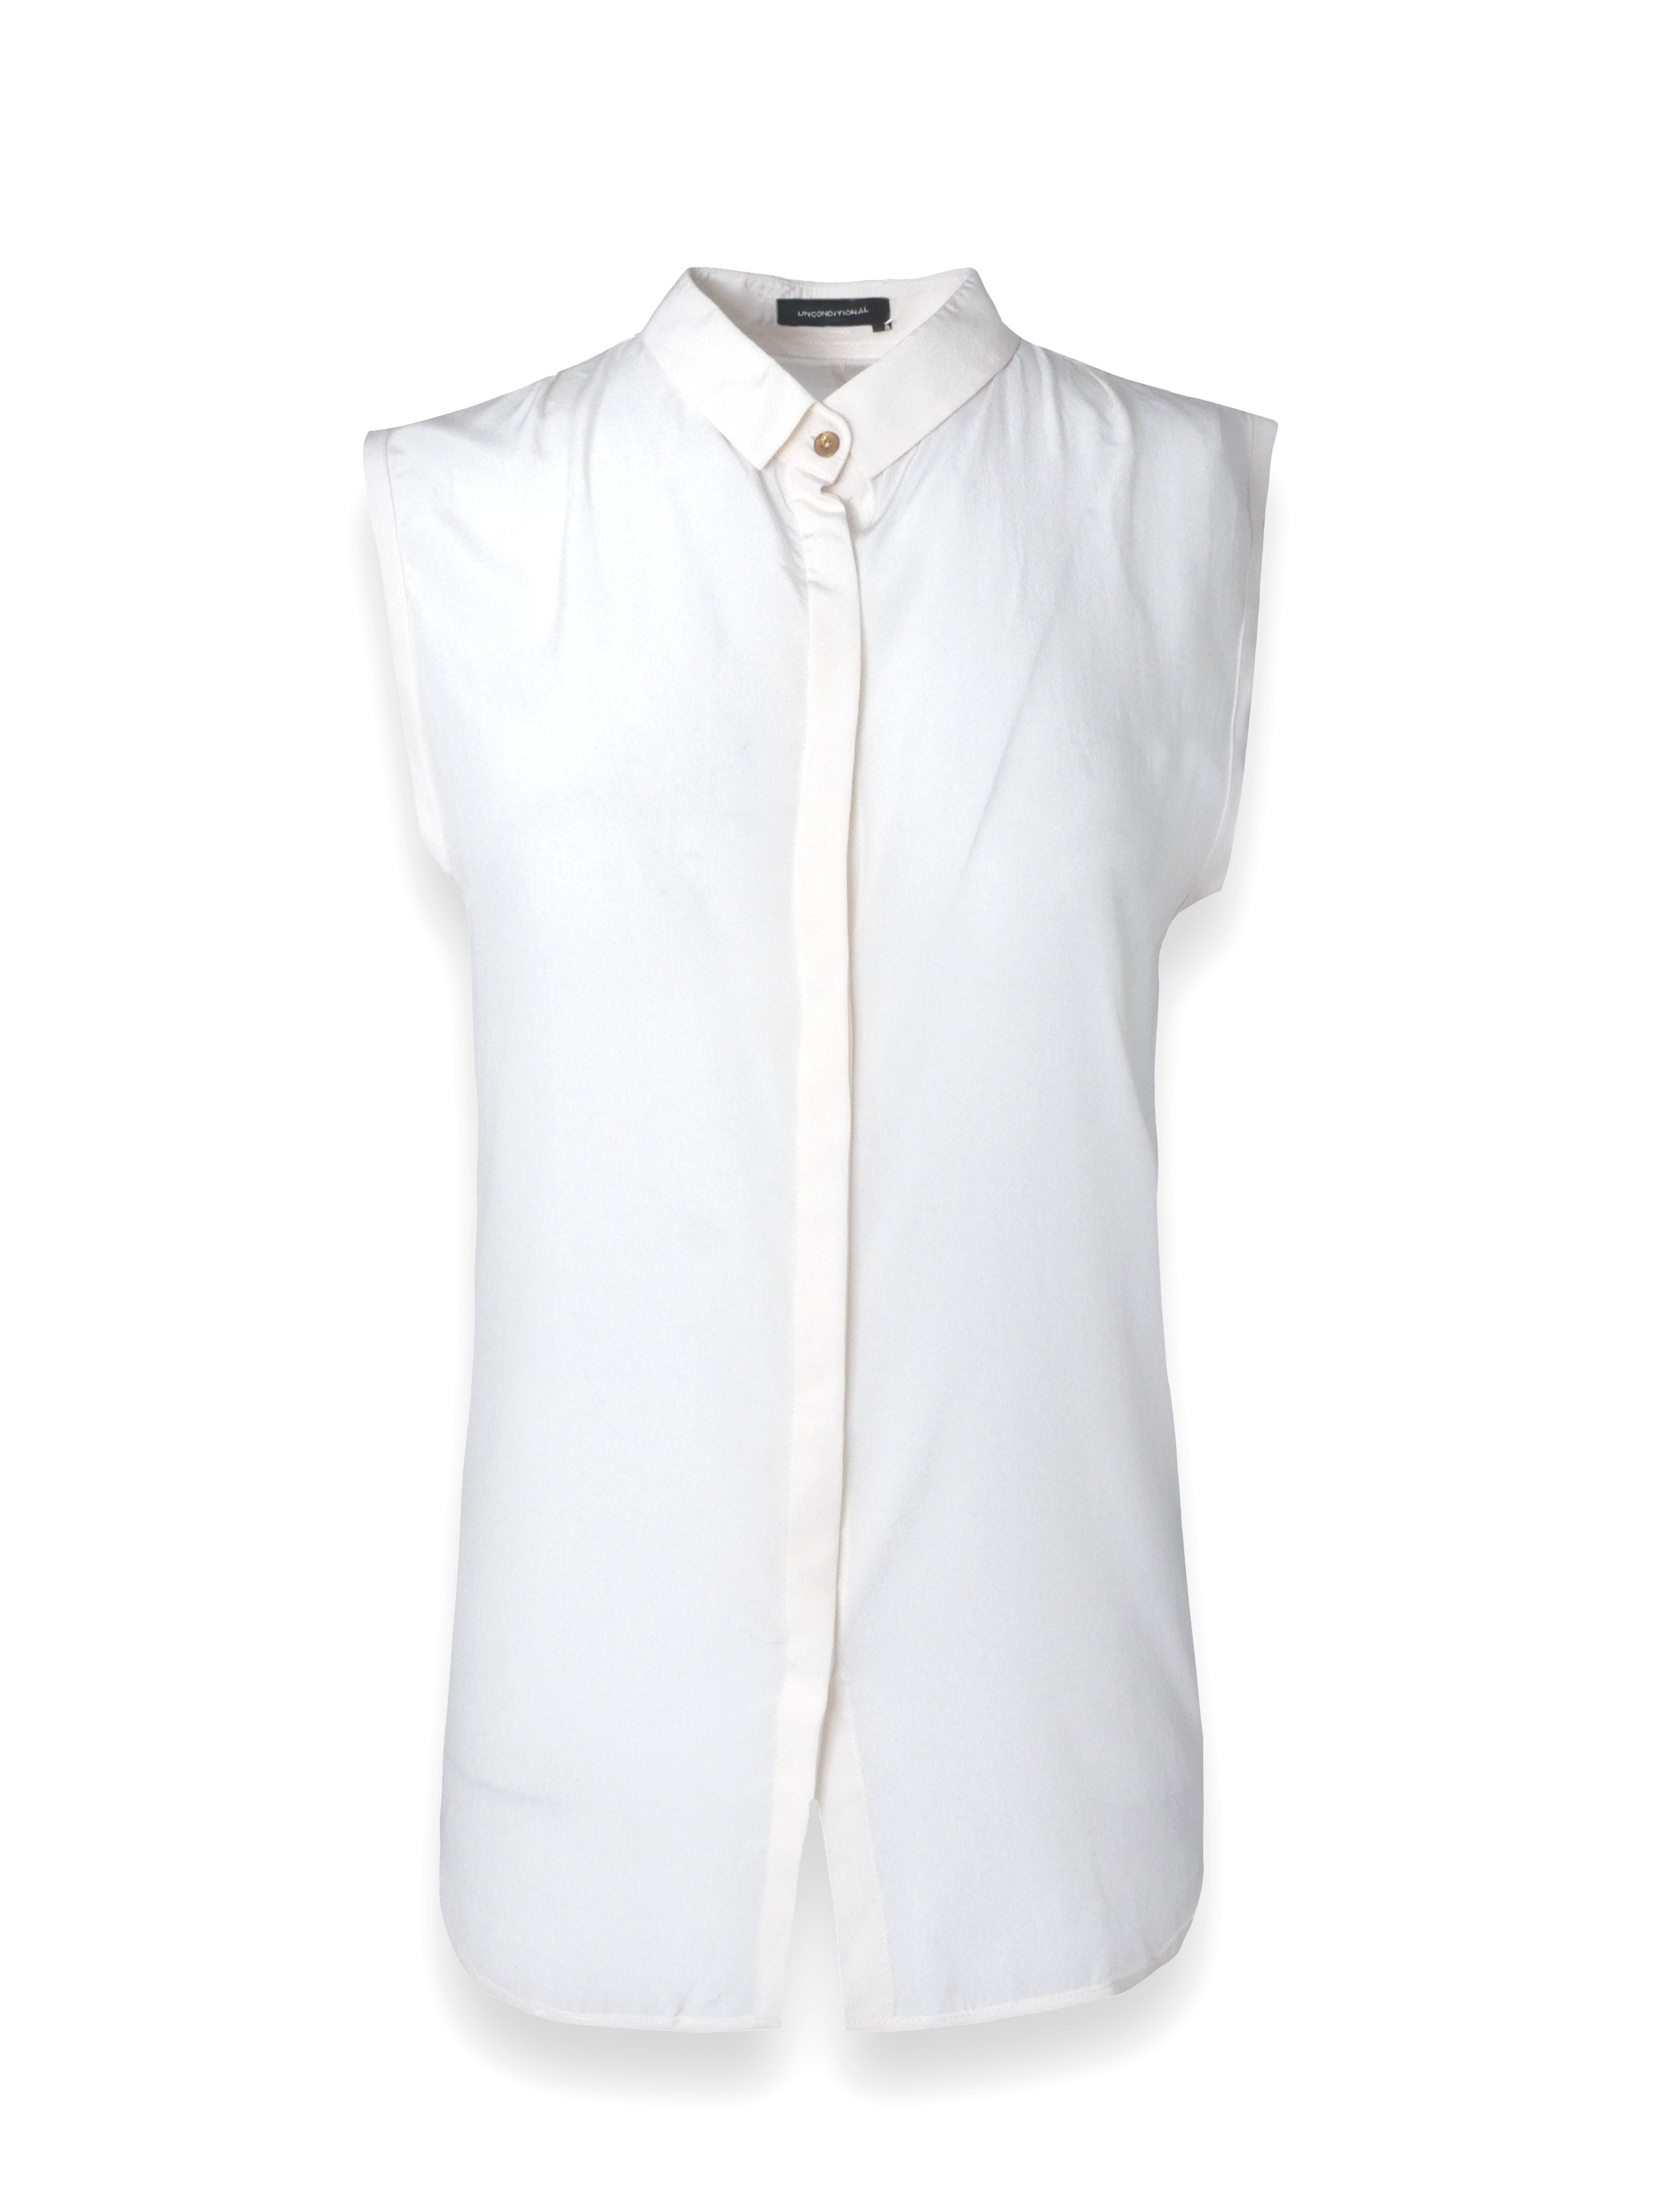 Sleeveless White Button Up Blouse With Cut Out Detail